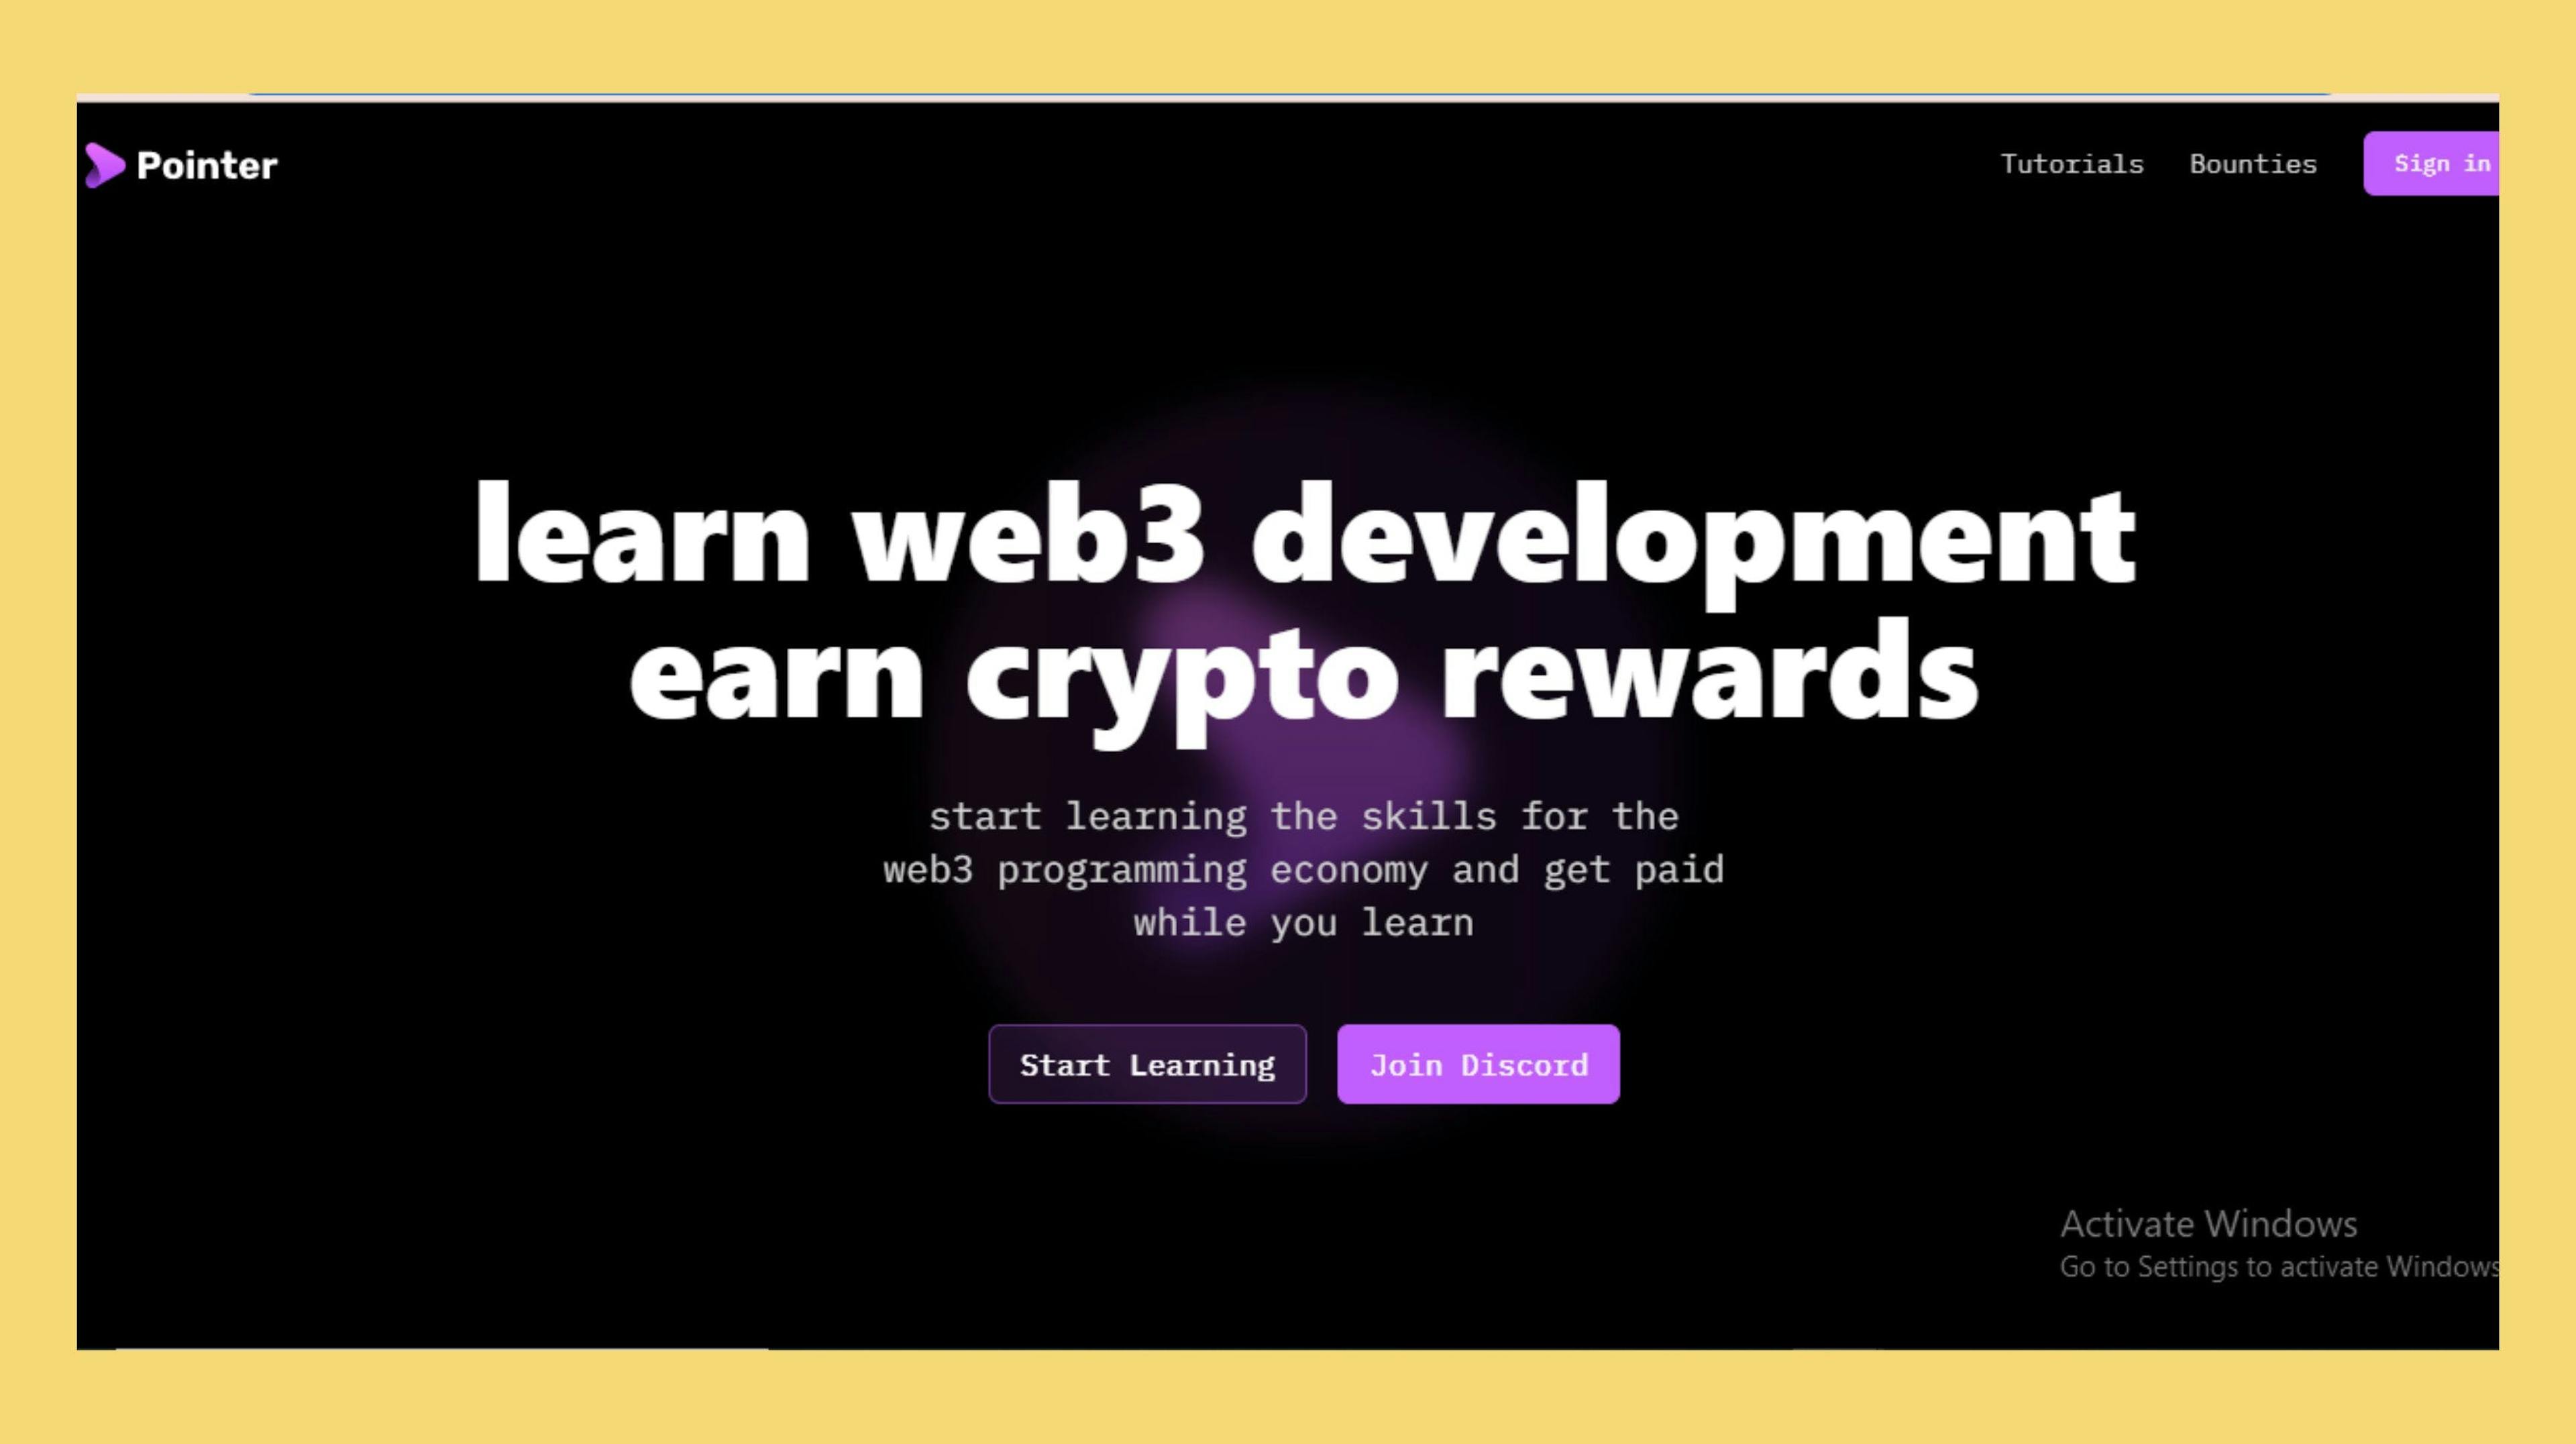 Learn and earn from Pointer